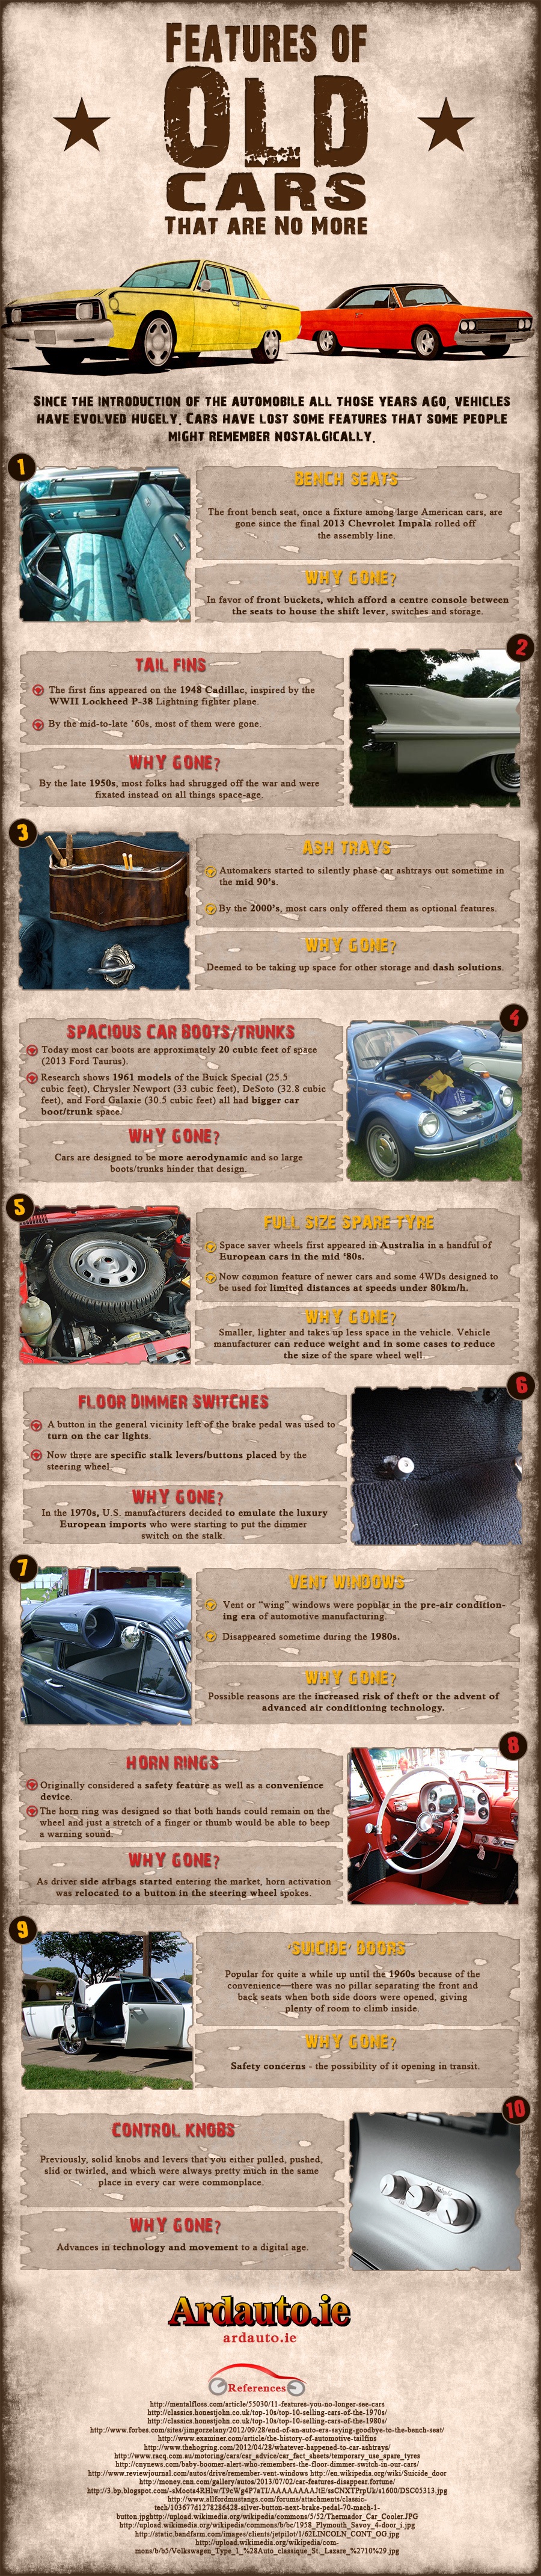 Features of old cars infographic